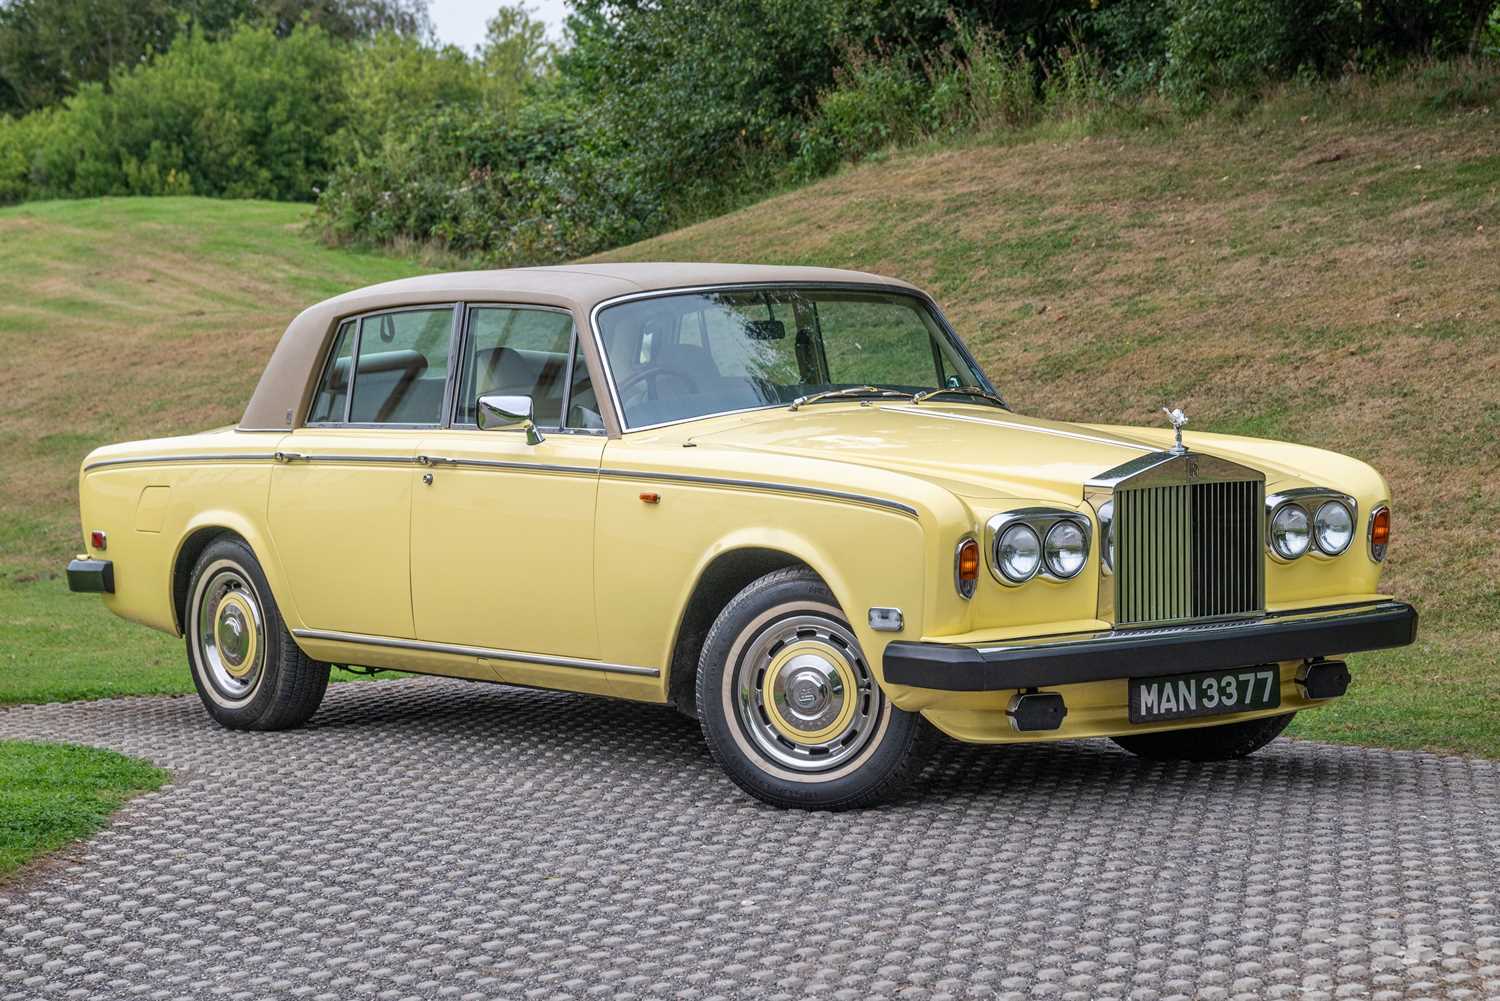 The 8 best RollsRoyce cars of all time  From Silver Ghost to Phantom   YouTube